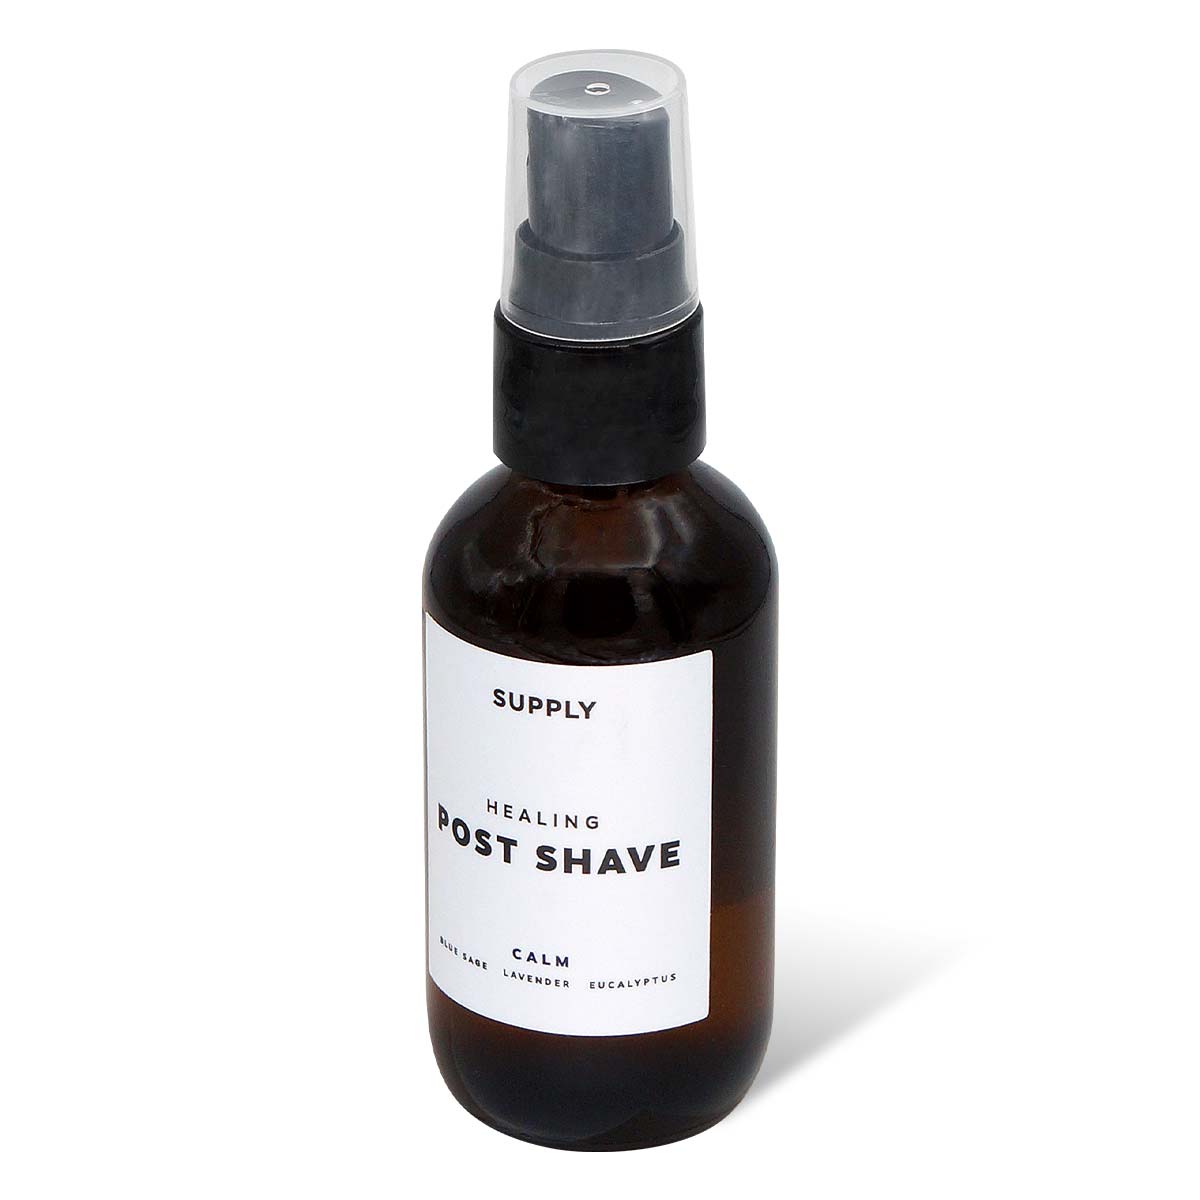 SUPPLY Healing Post Shave CALM 2 oz-p_1